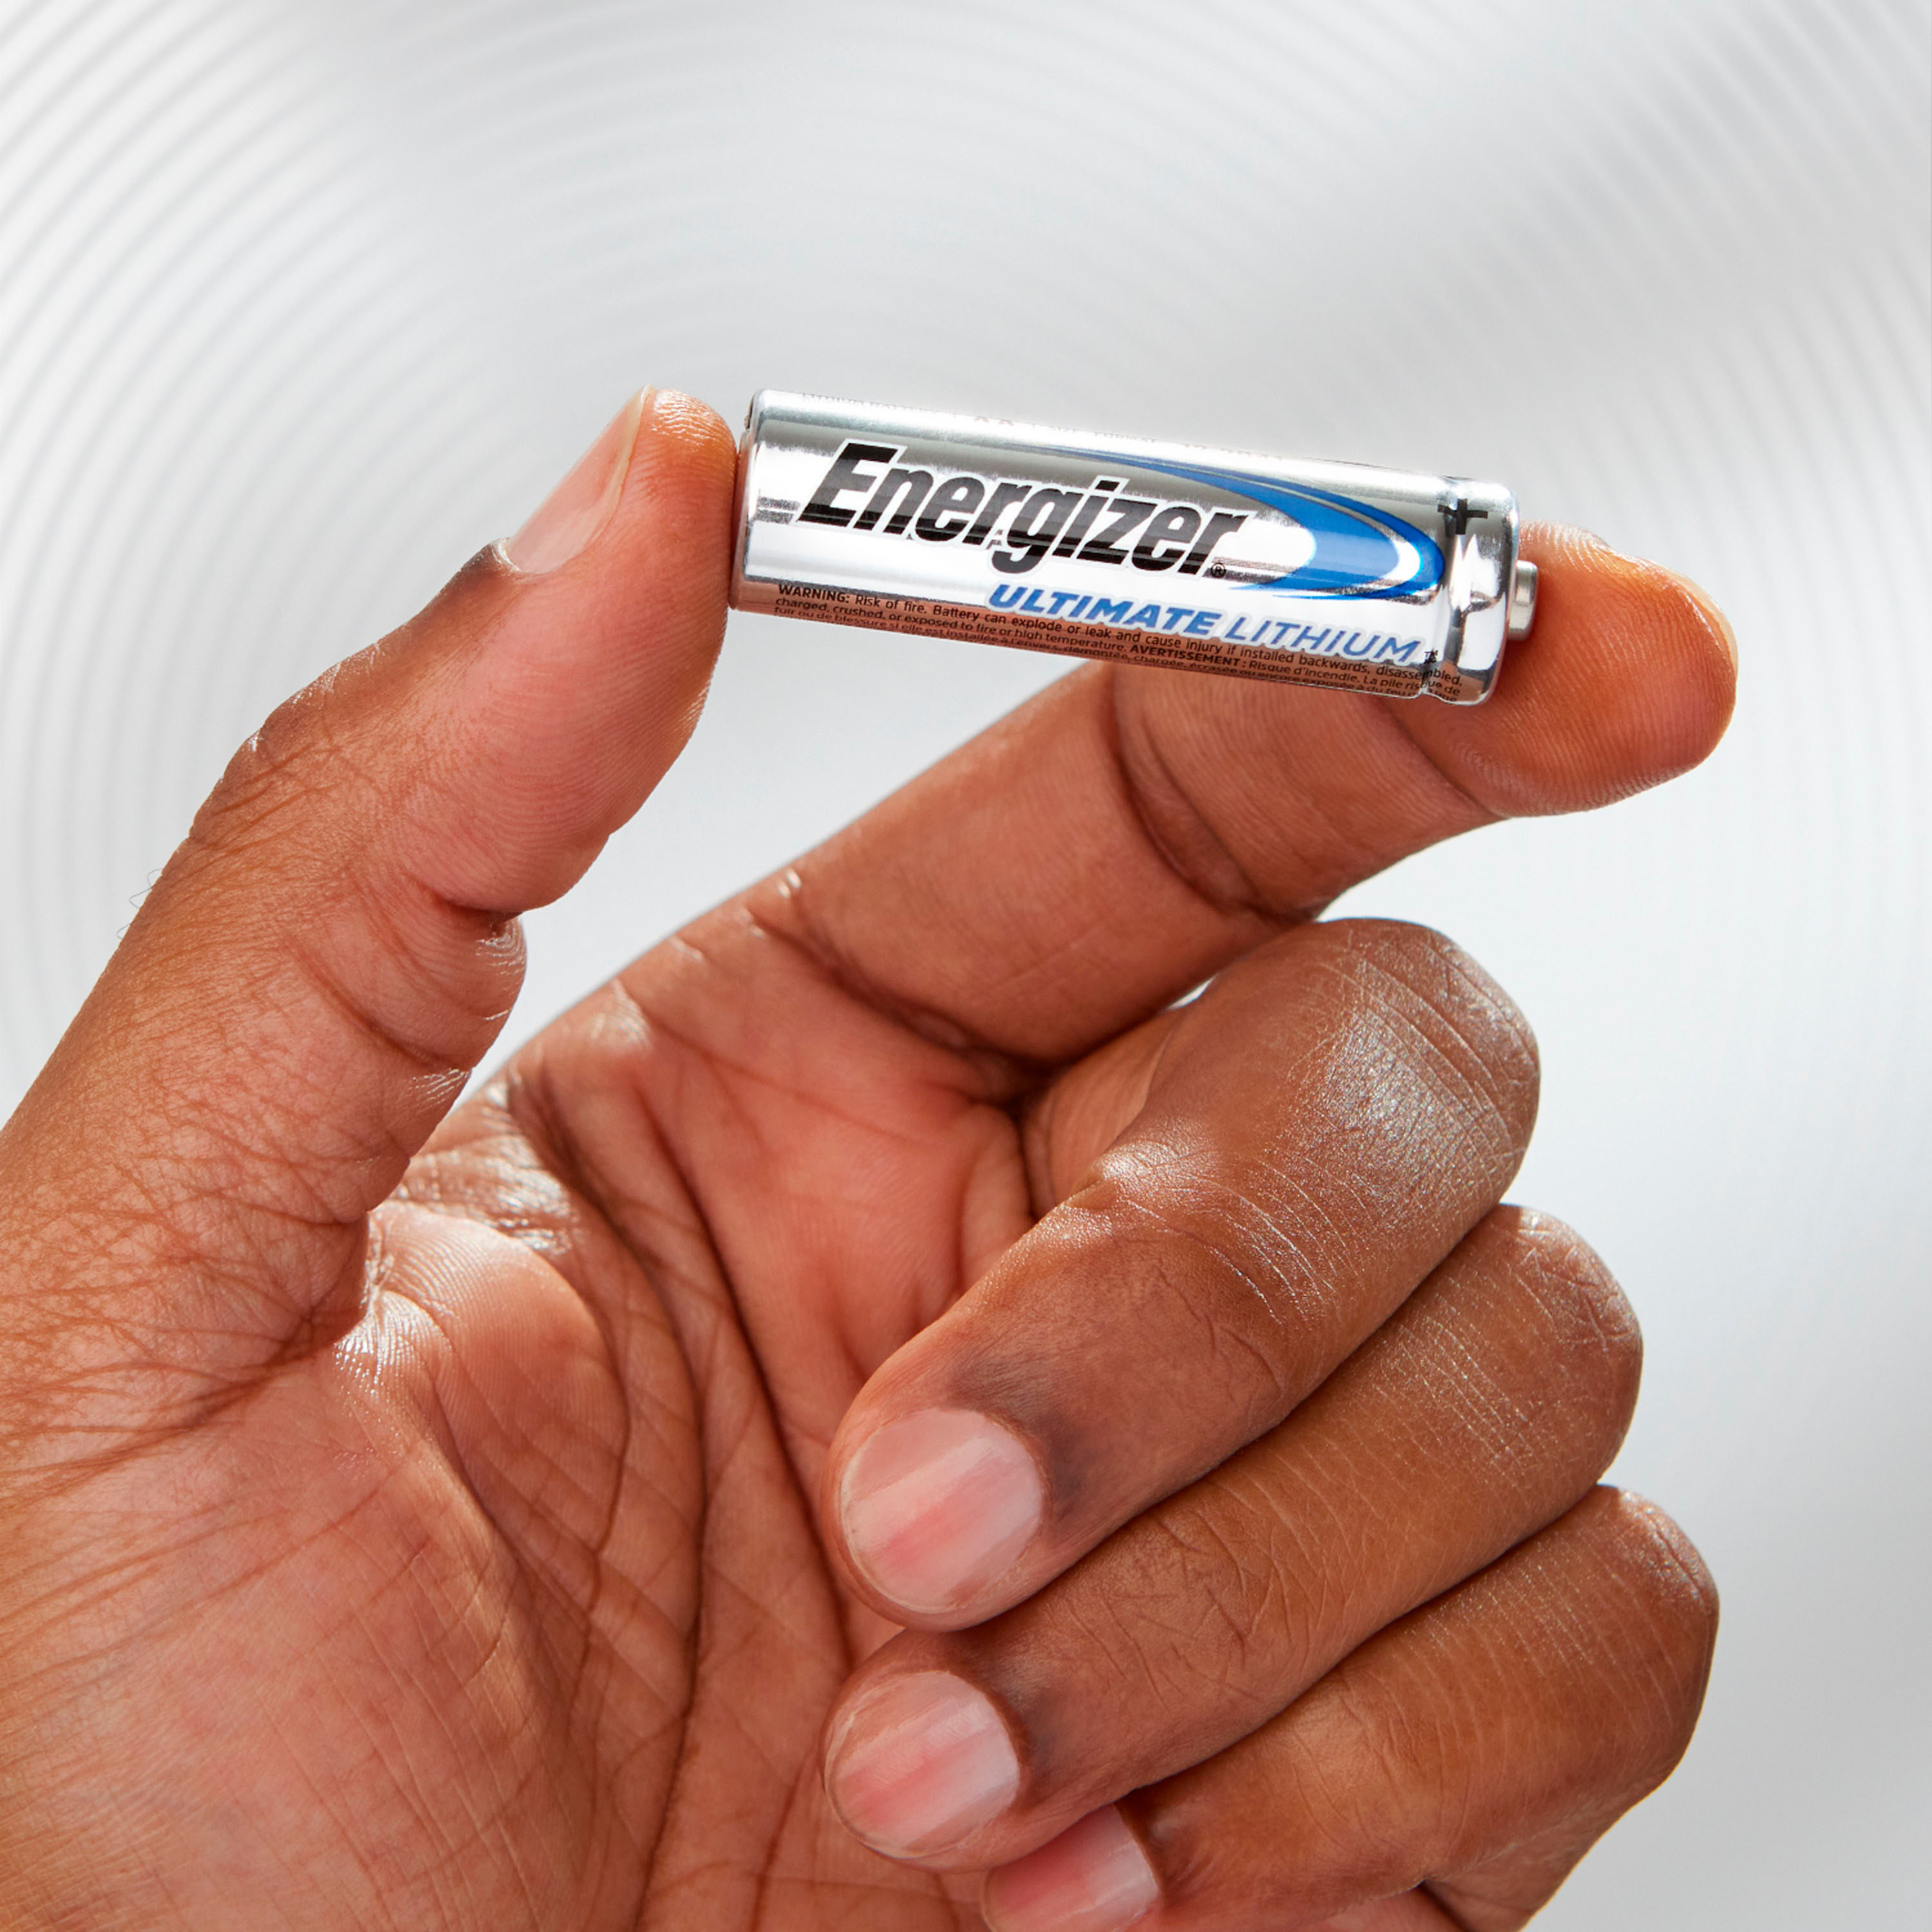 Energizer - Ultimate Lithium AA Batteries (4 Pack), Double A Batteries